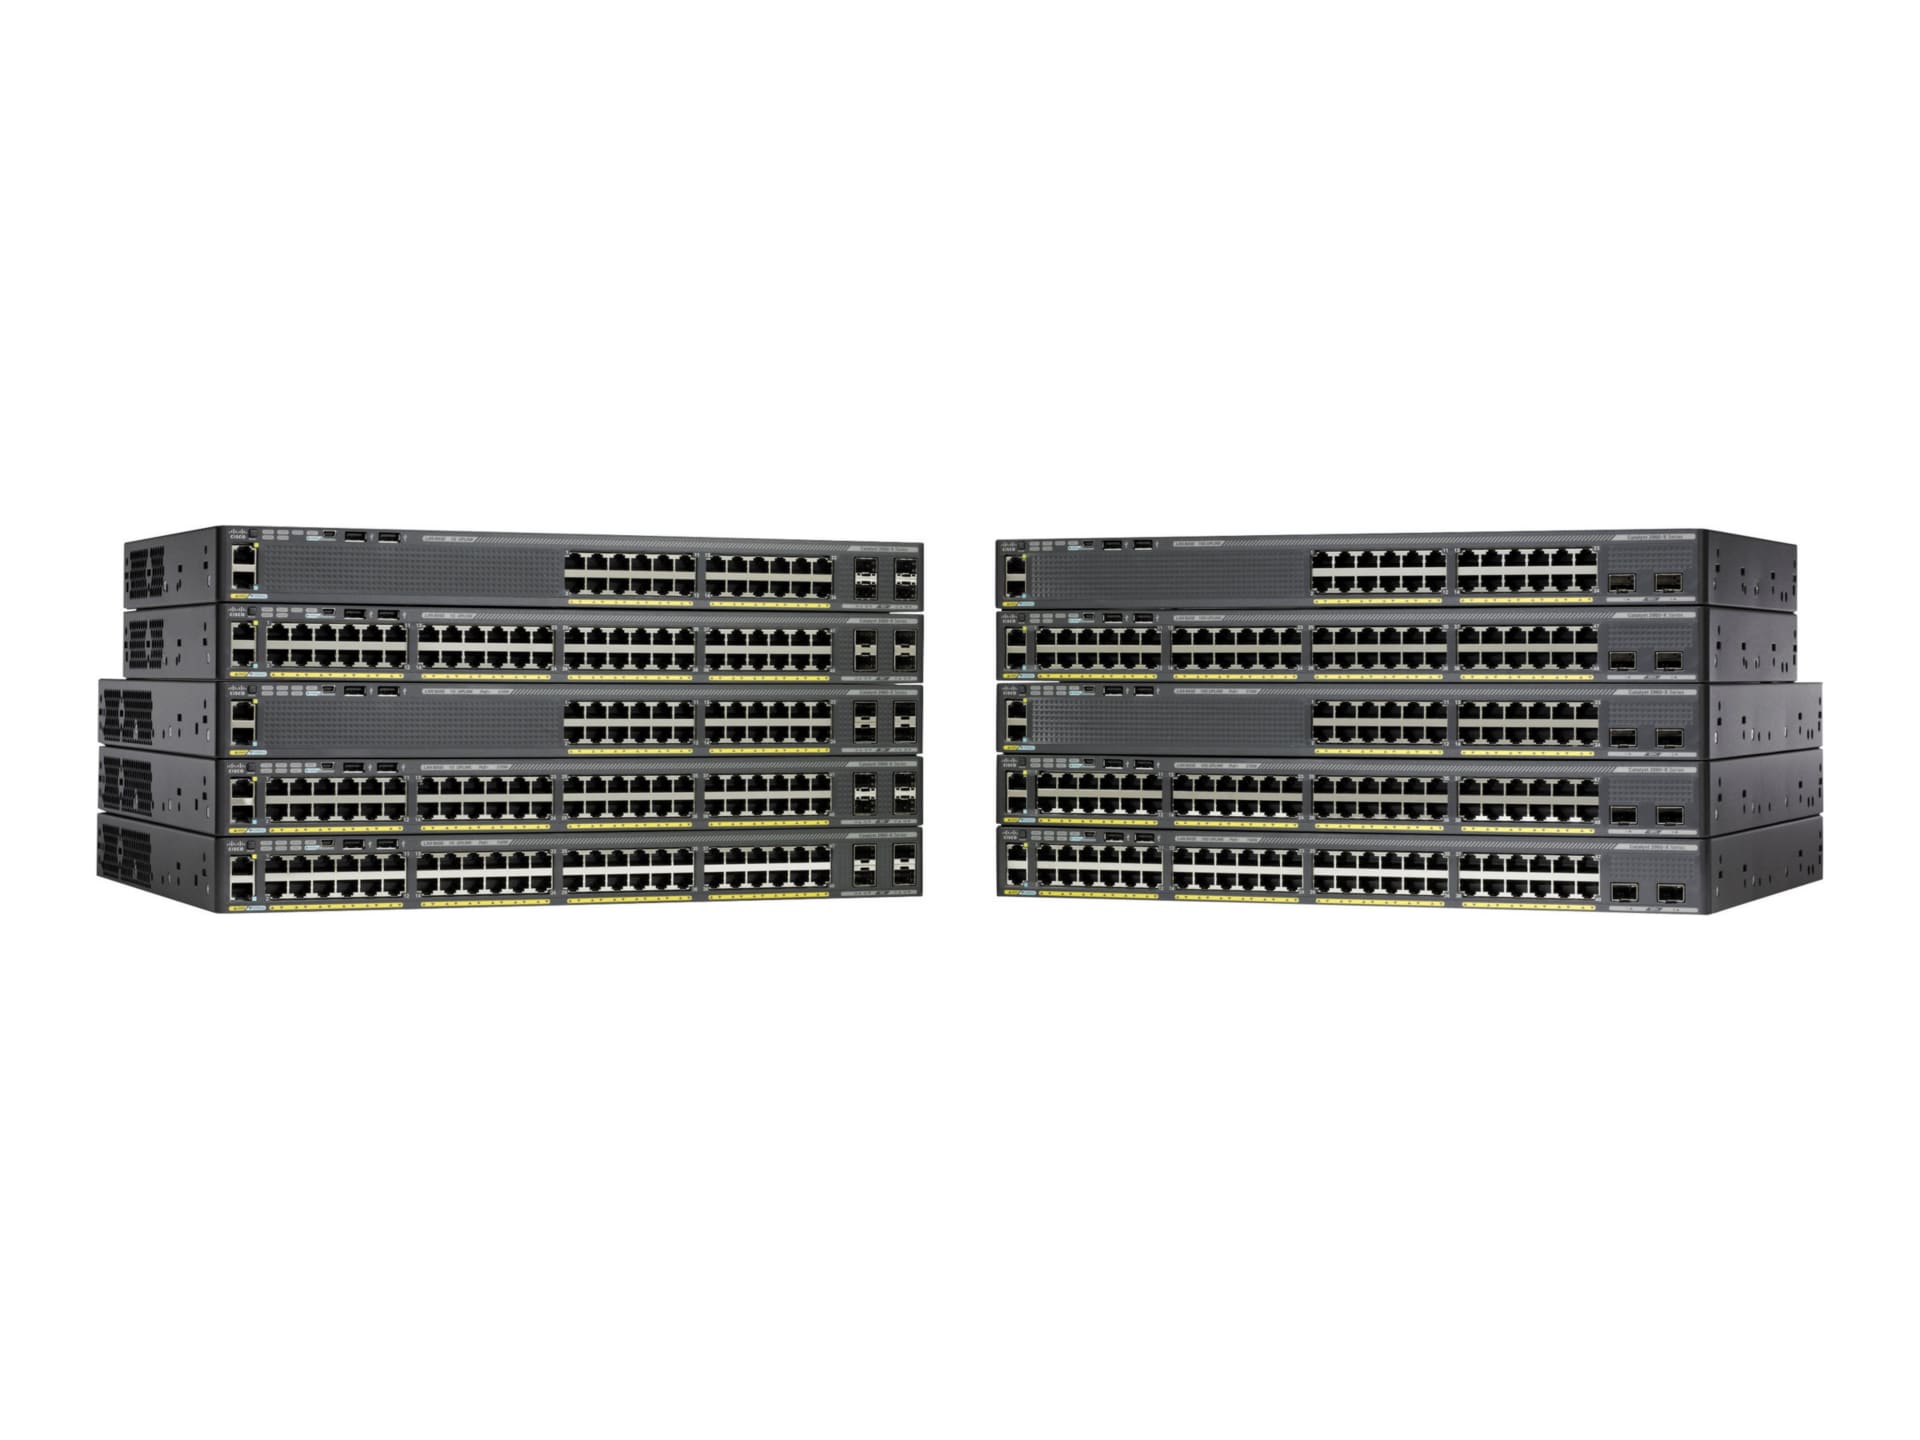 Cisco Catalyst 2960X-24PS-L - switch - 24 ports - managed - rack-mountable